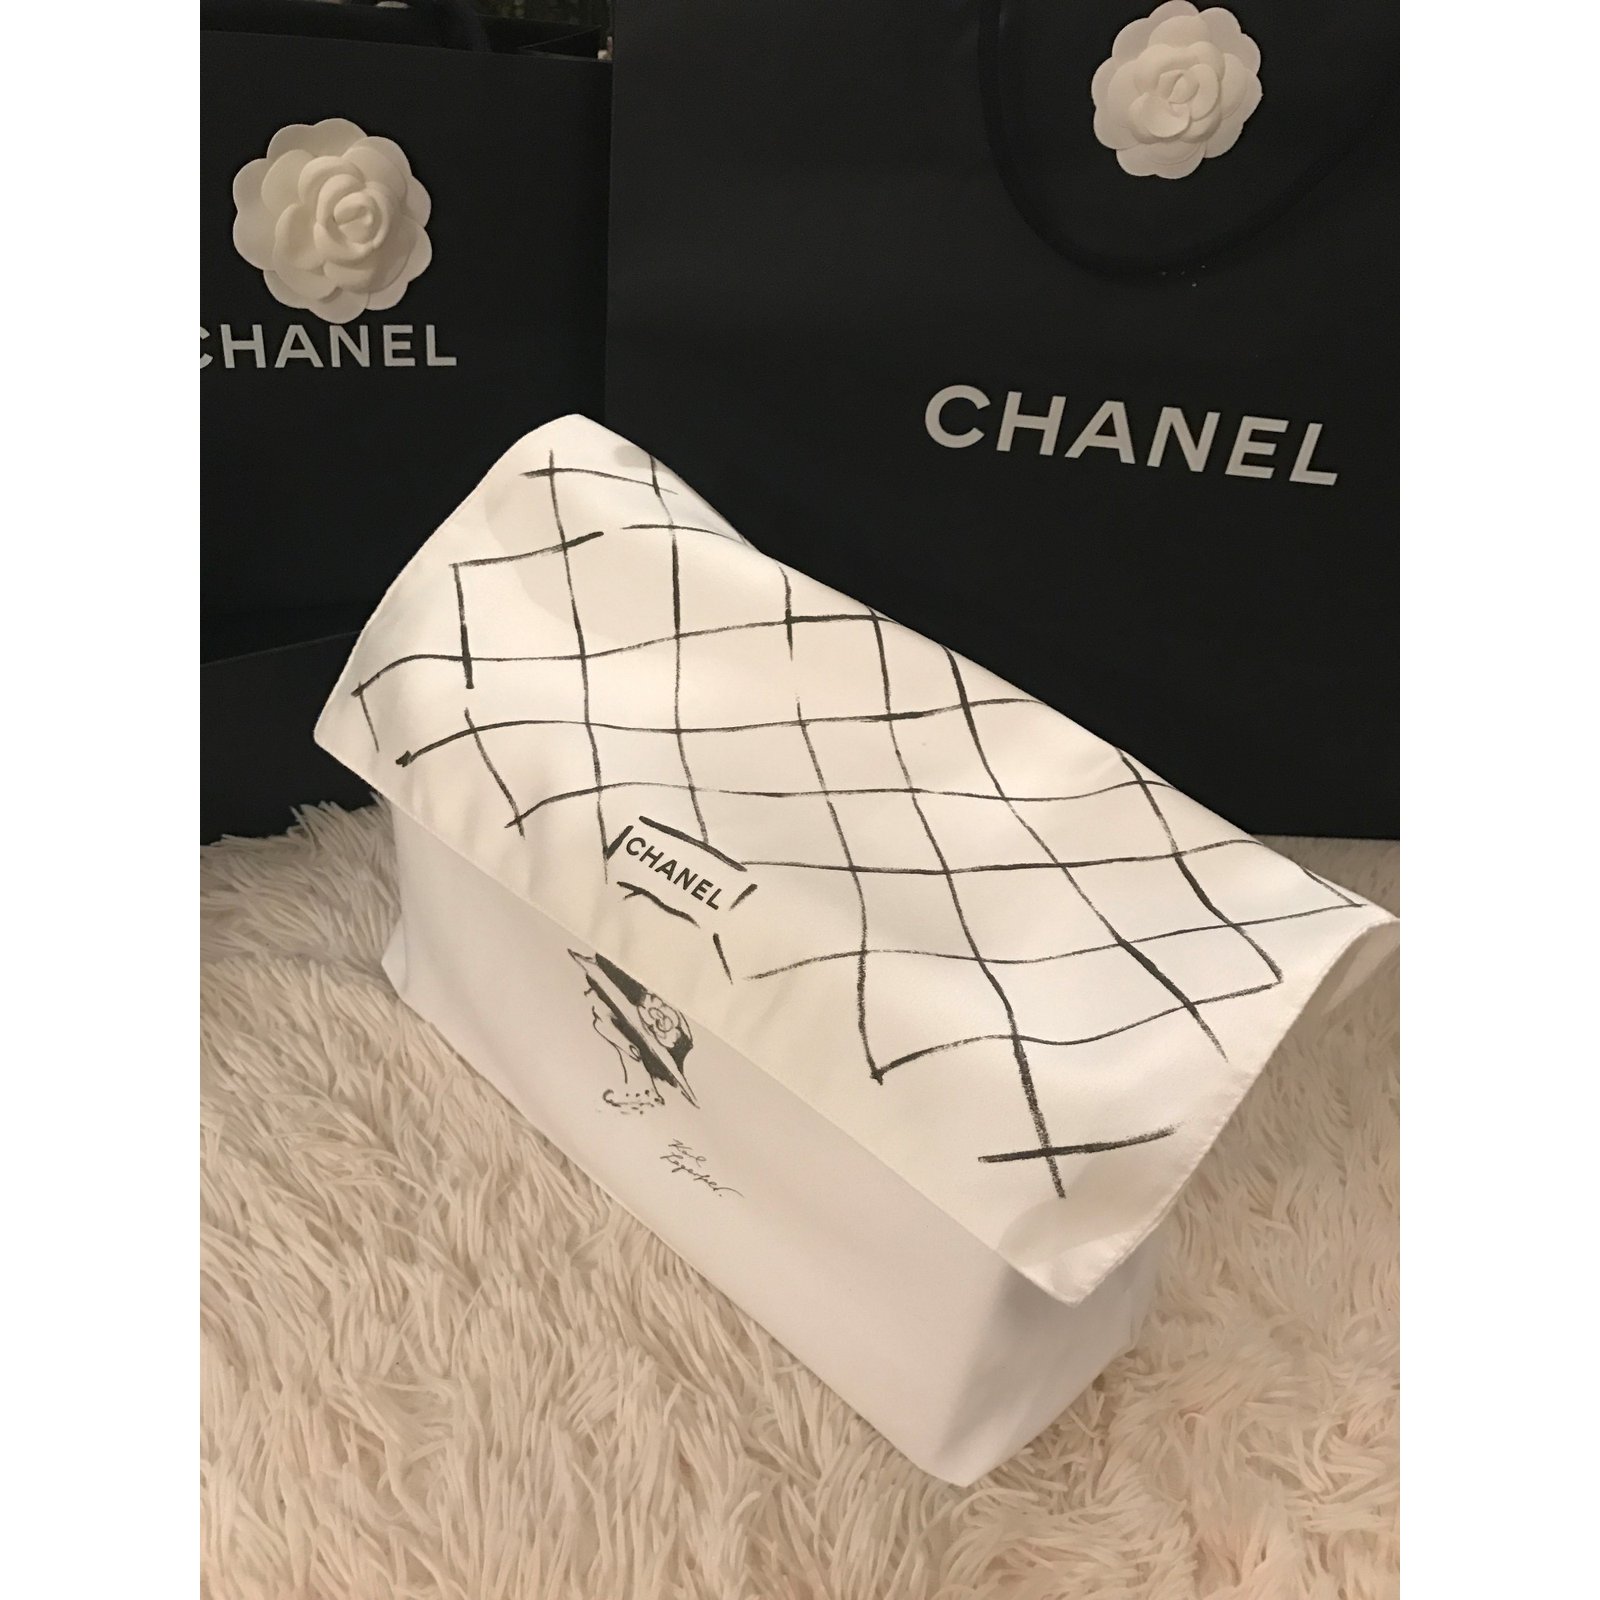 chanel silver wallet on a chain